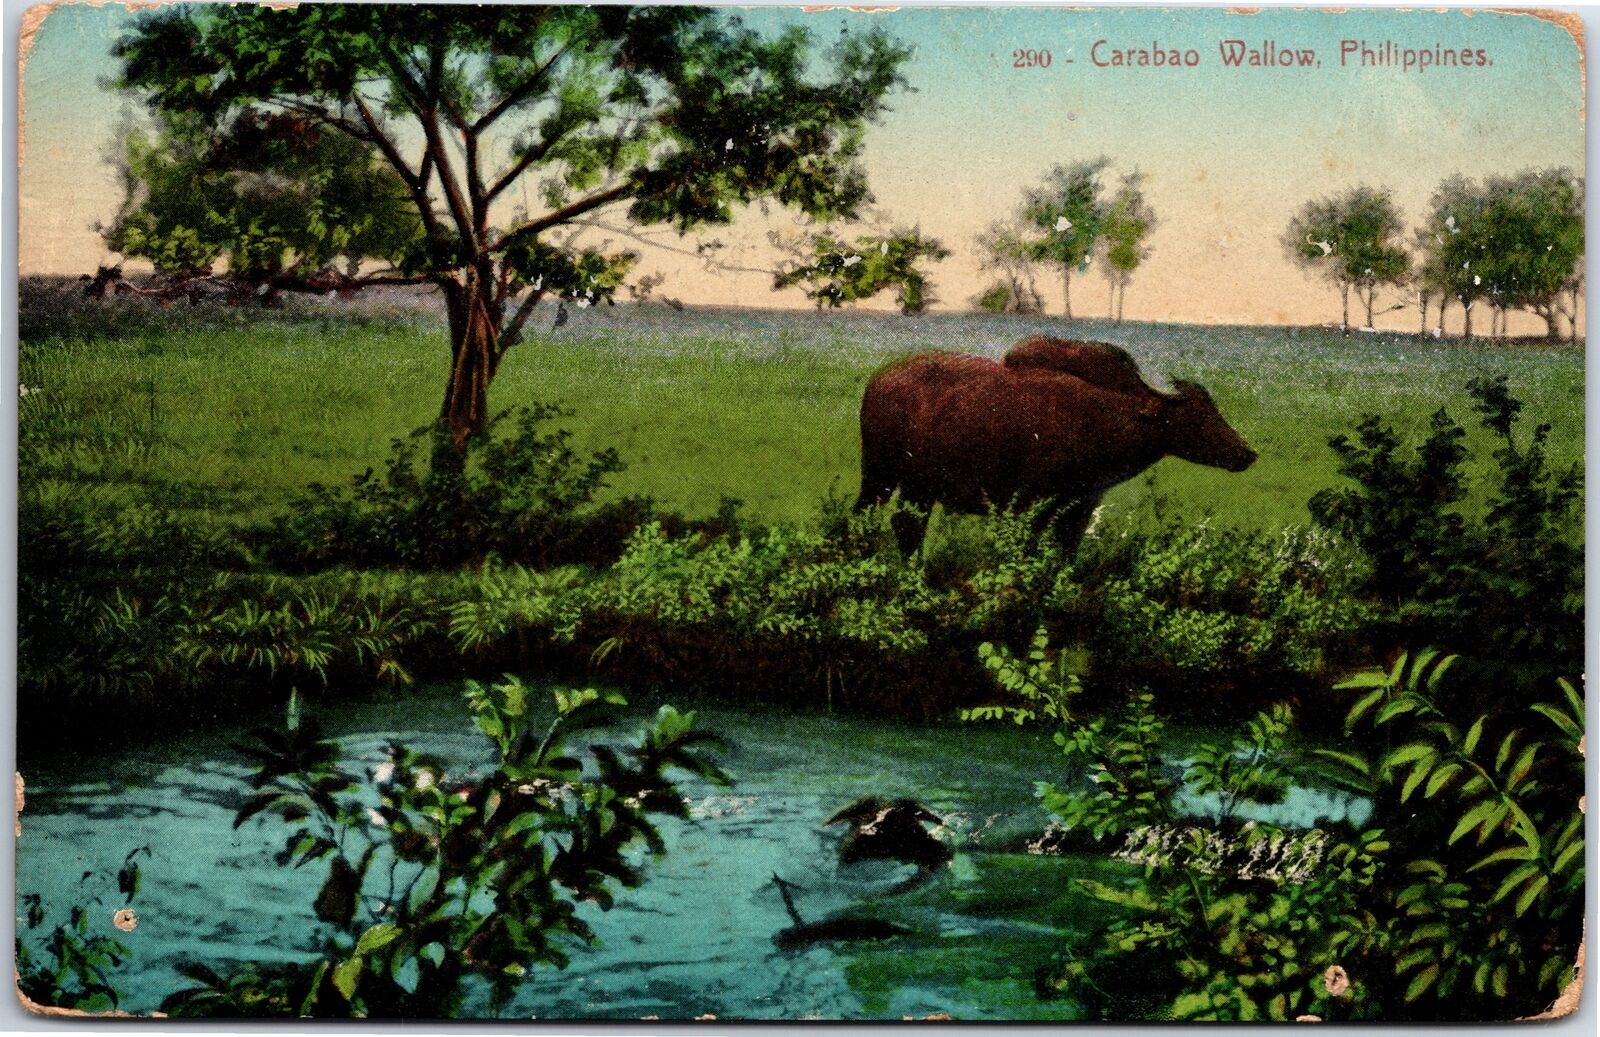 VINTAGE POSTCARD CARABAO WALLOW IN THE FARM FIELDS OF THE PHILLIPINES c. 1910s